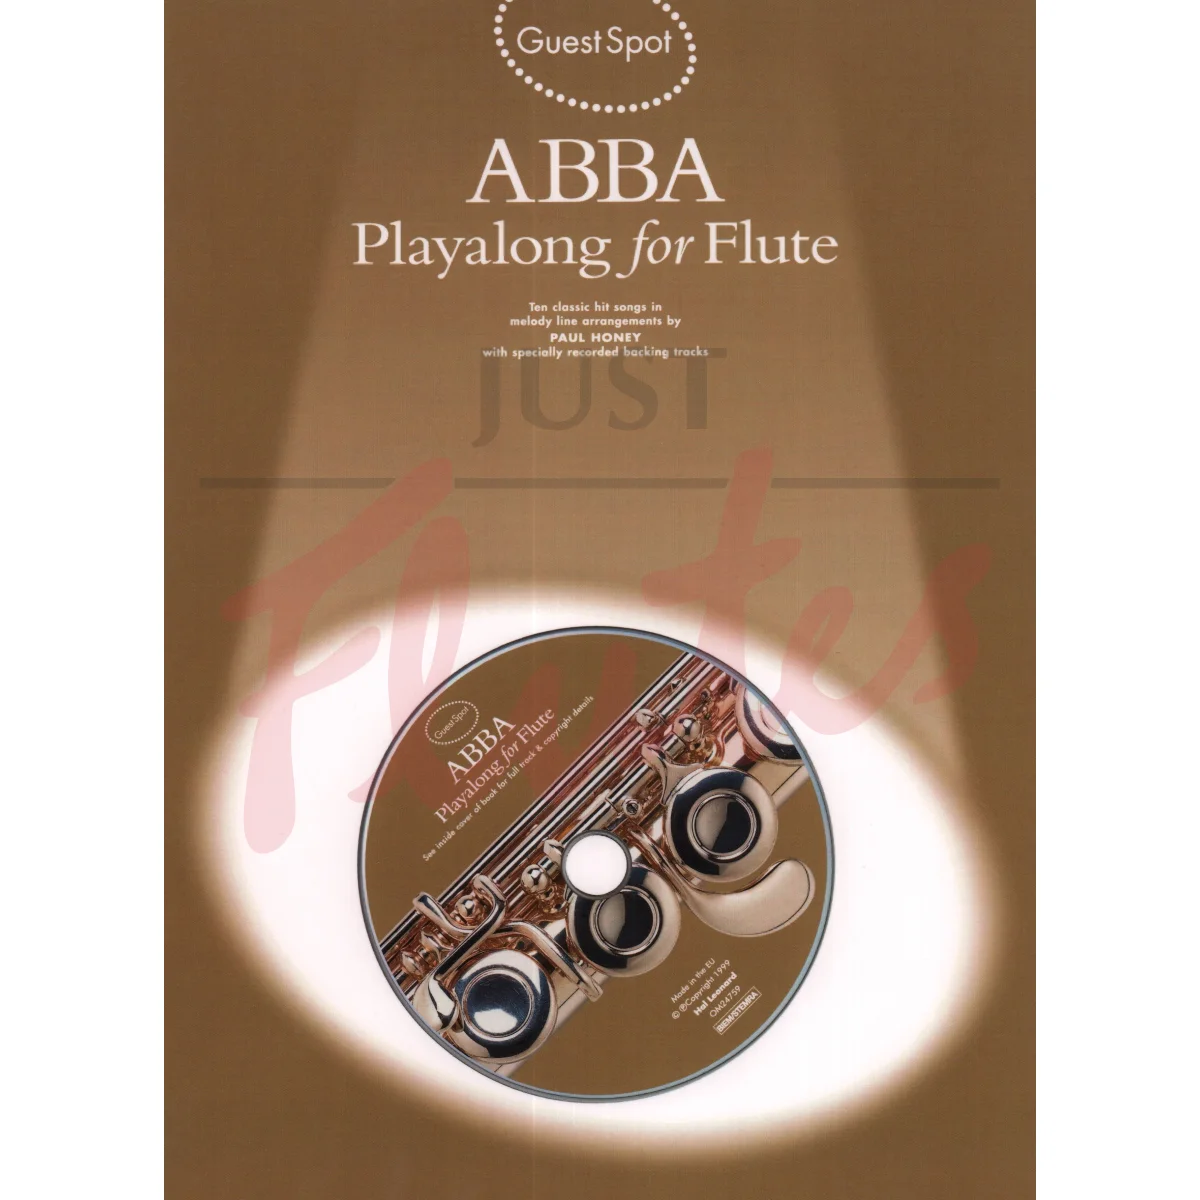 ABBA for Flute